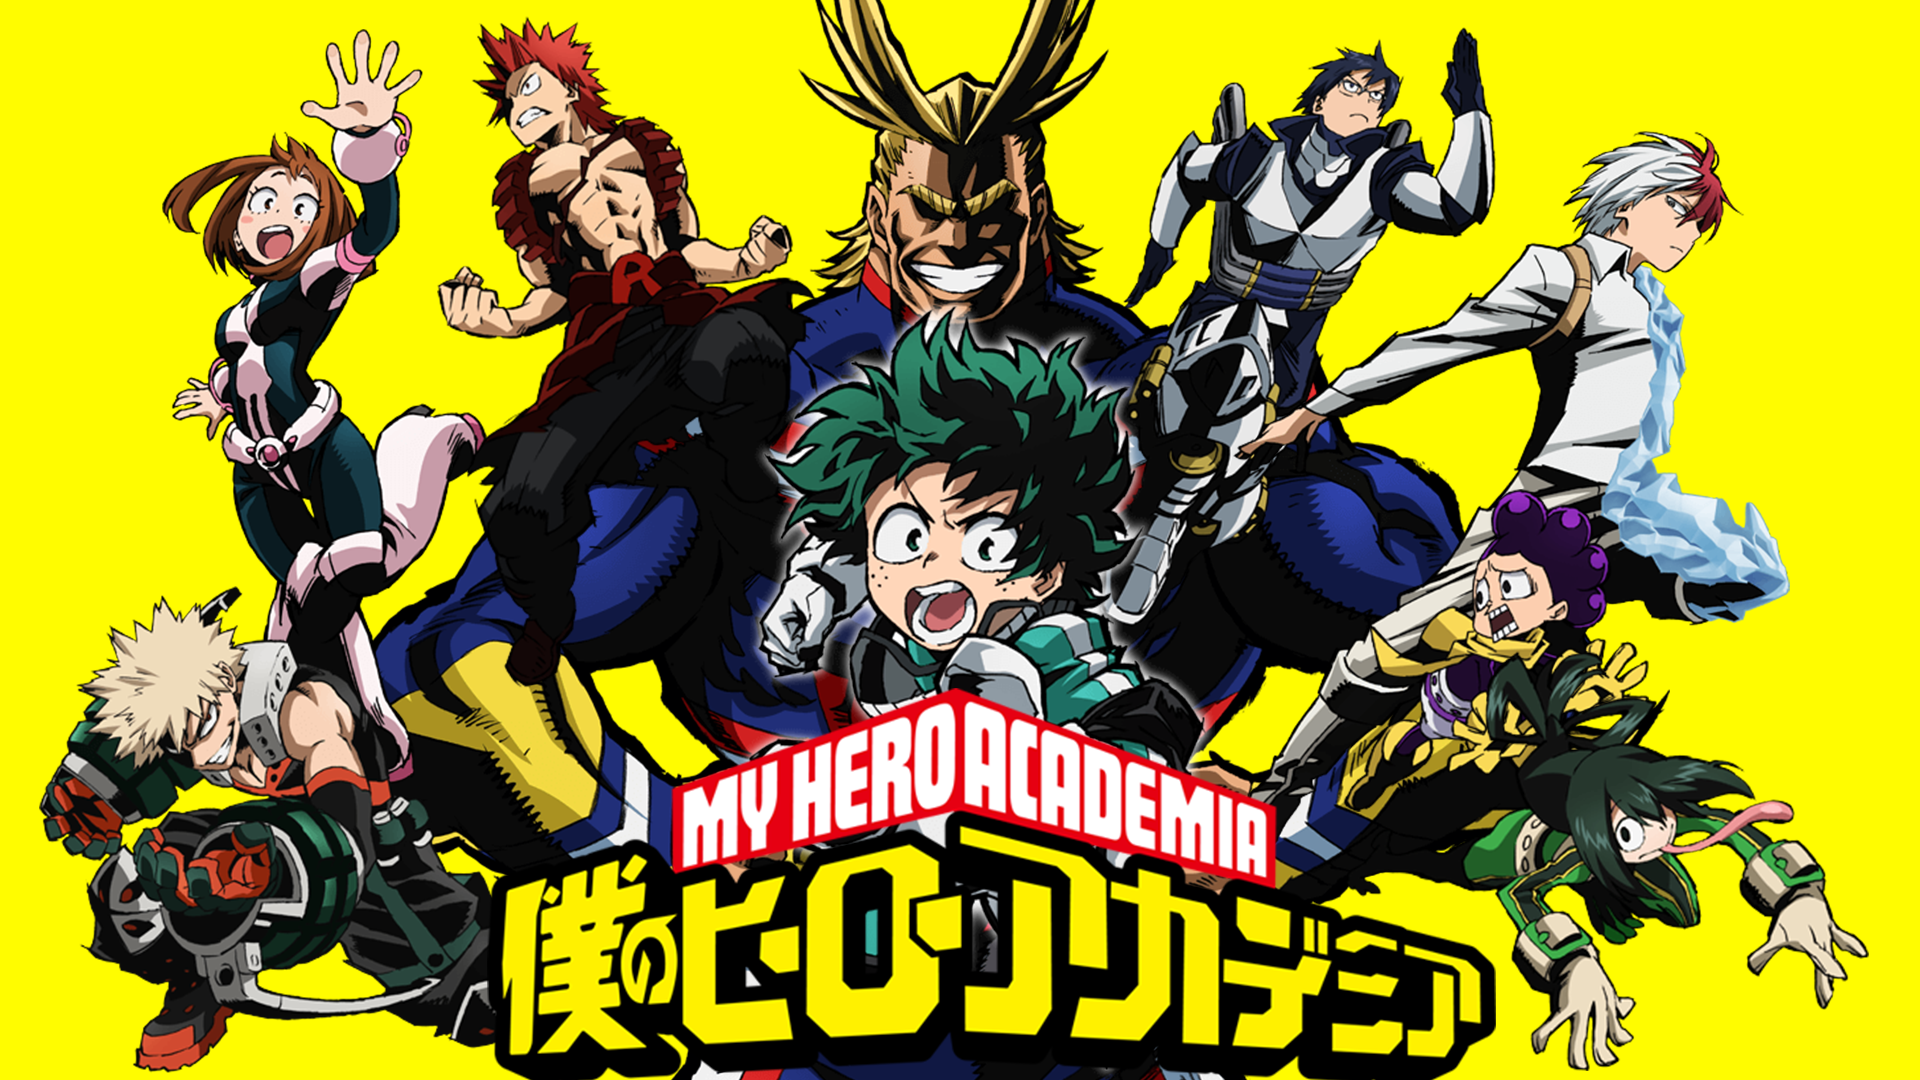 My Hero Academia Hd Wallpaper Background Image 1920x1080 Id 713076 Wallpaper Abyss